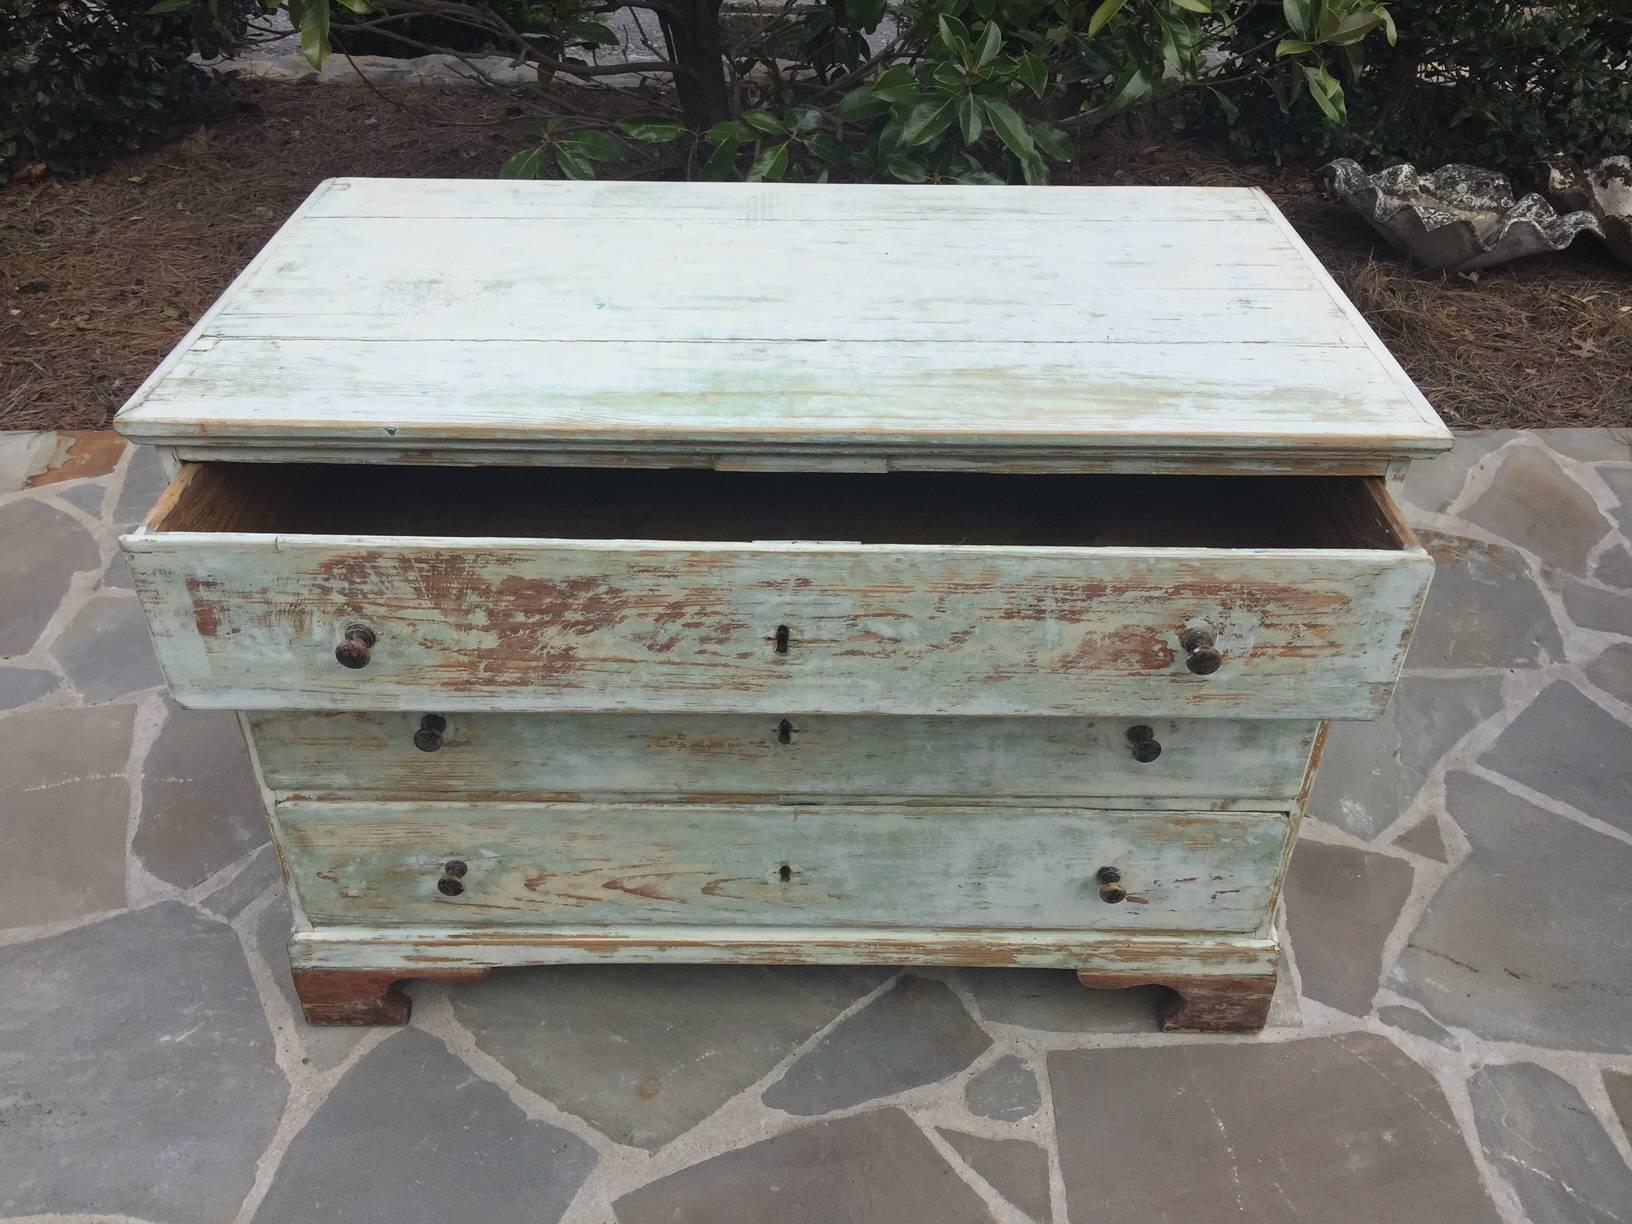 A Swedish 19th century Gustavian style chest, circa 1850. This Swedish three-drawer chest features nice clean lines, a grey blue painted wood color with wood showing through, wood pulls and carved legs.